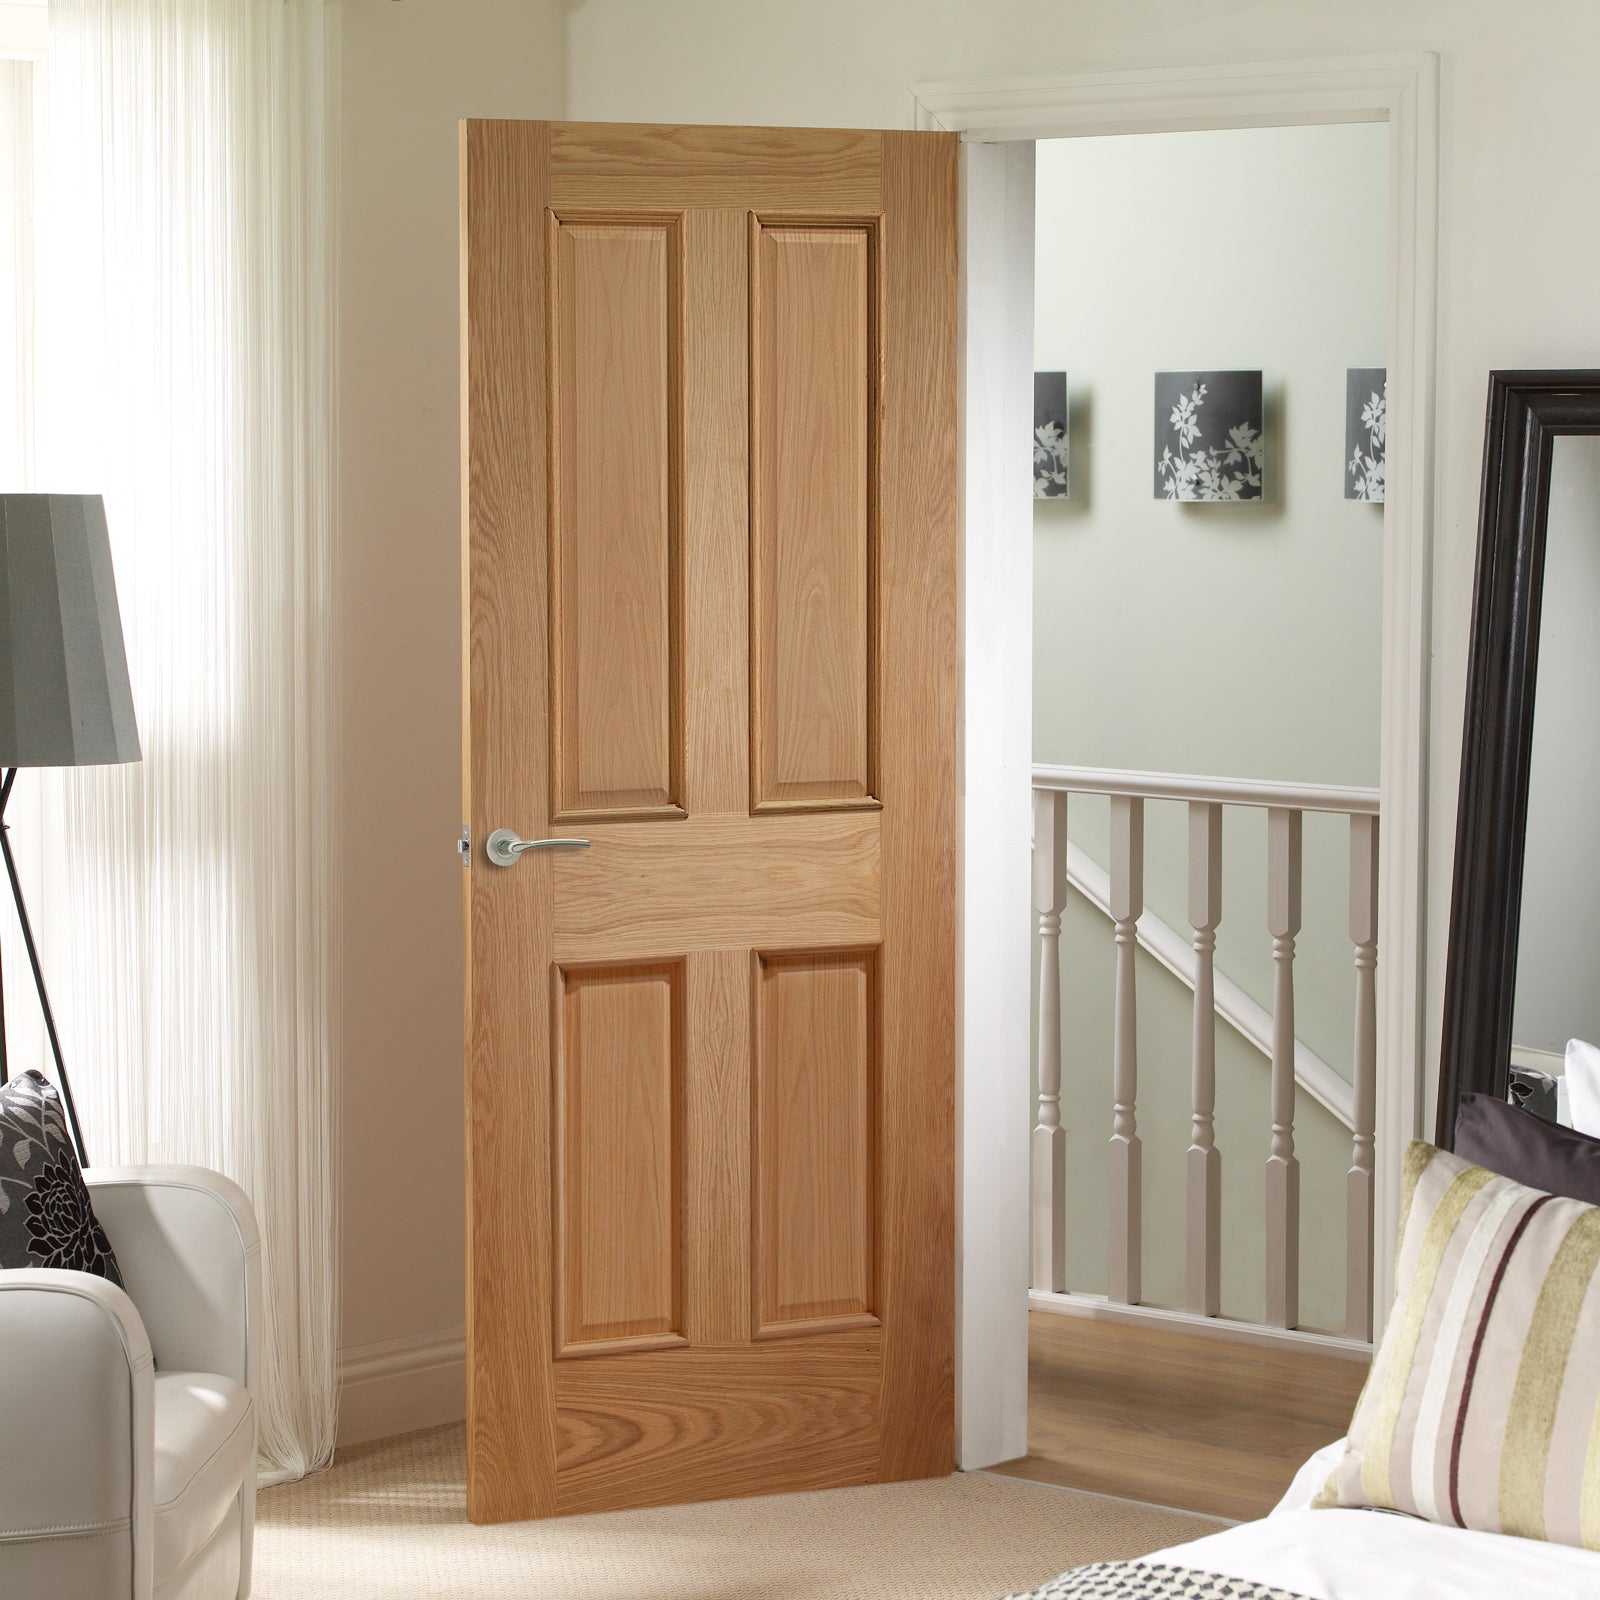 SHOW Internal Oak Victorian Fire Door with Raised Mouldings lifestyle